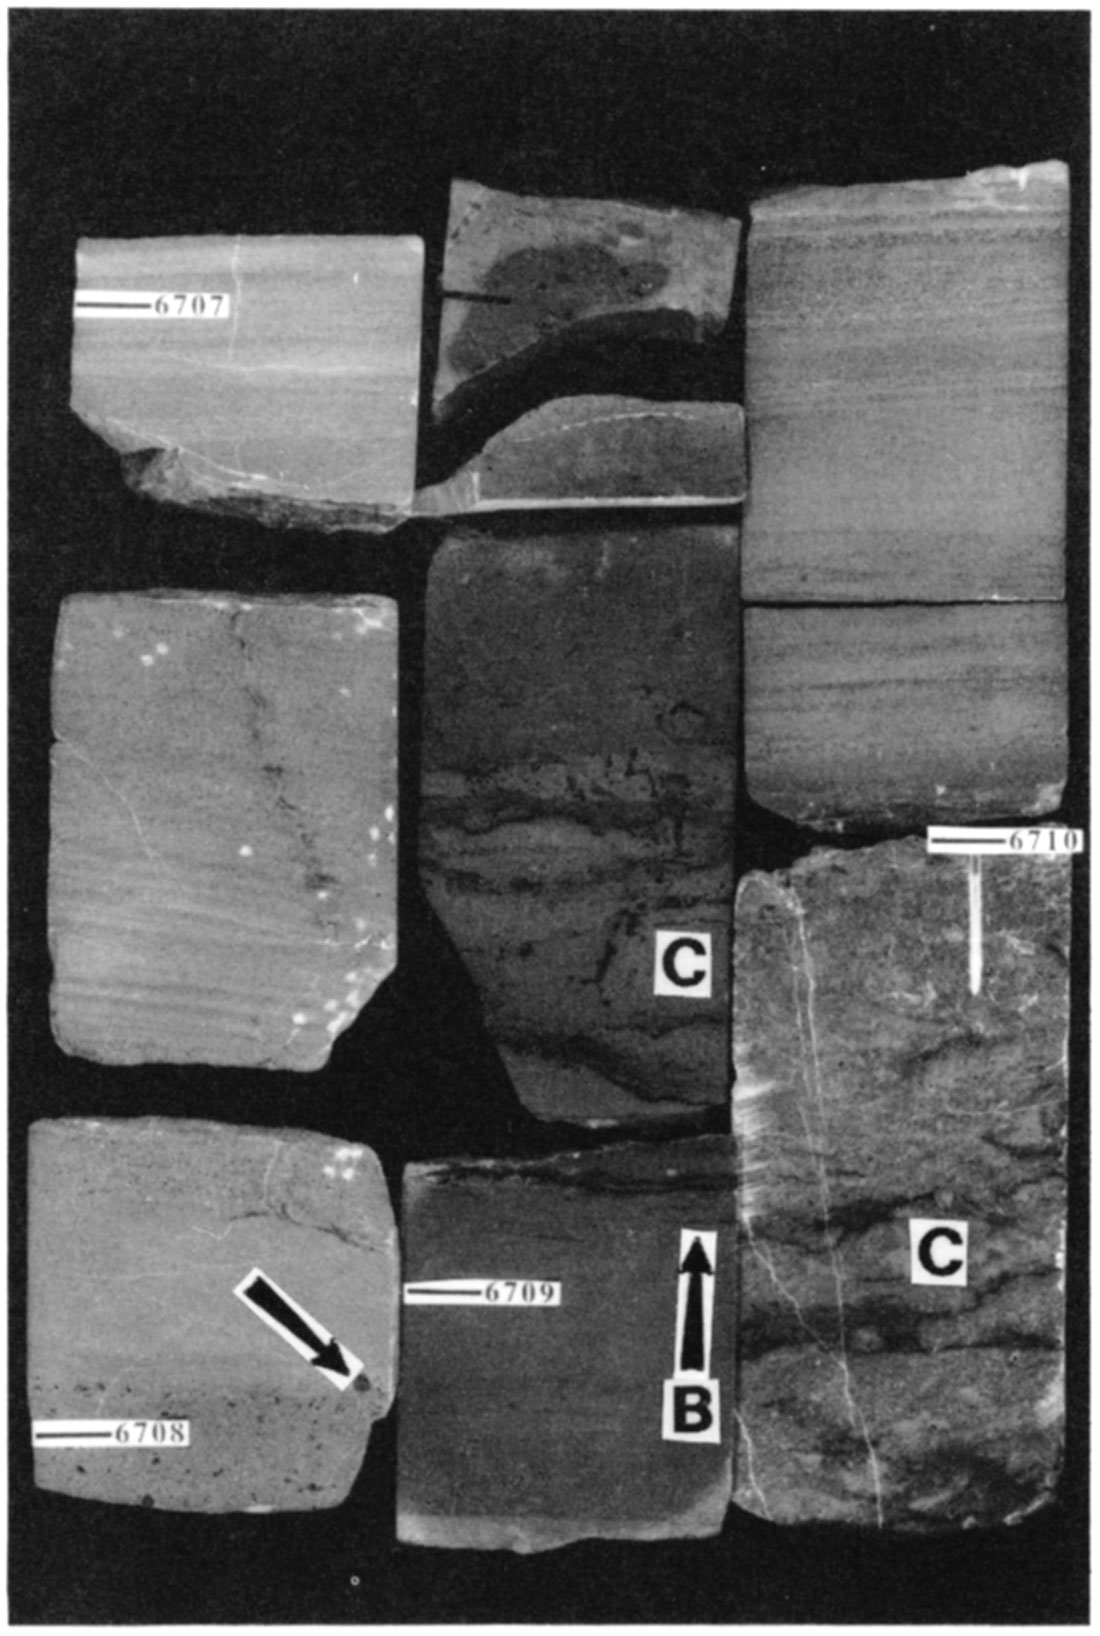 Quartzose grainstone from the Stevens Member in the Mobil #1 Foster was deposited as a vegetated eolian sand sheet.